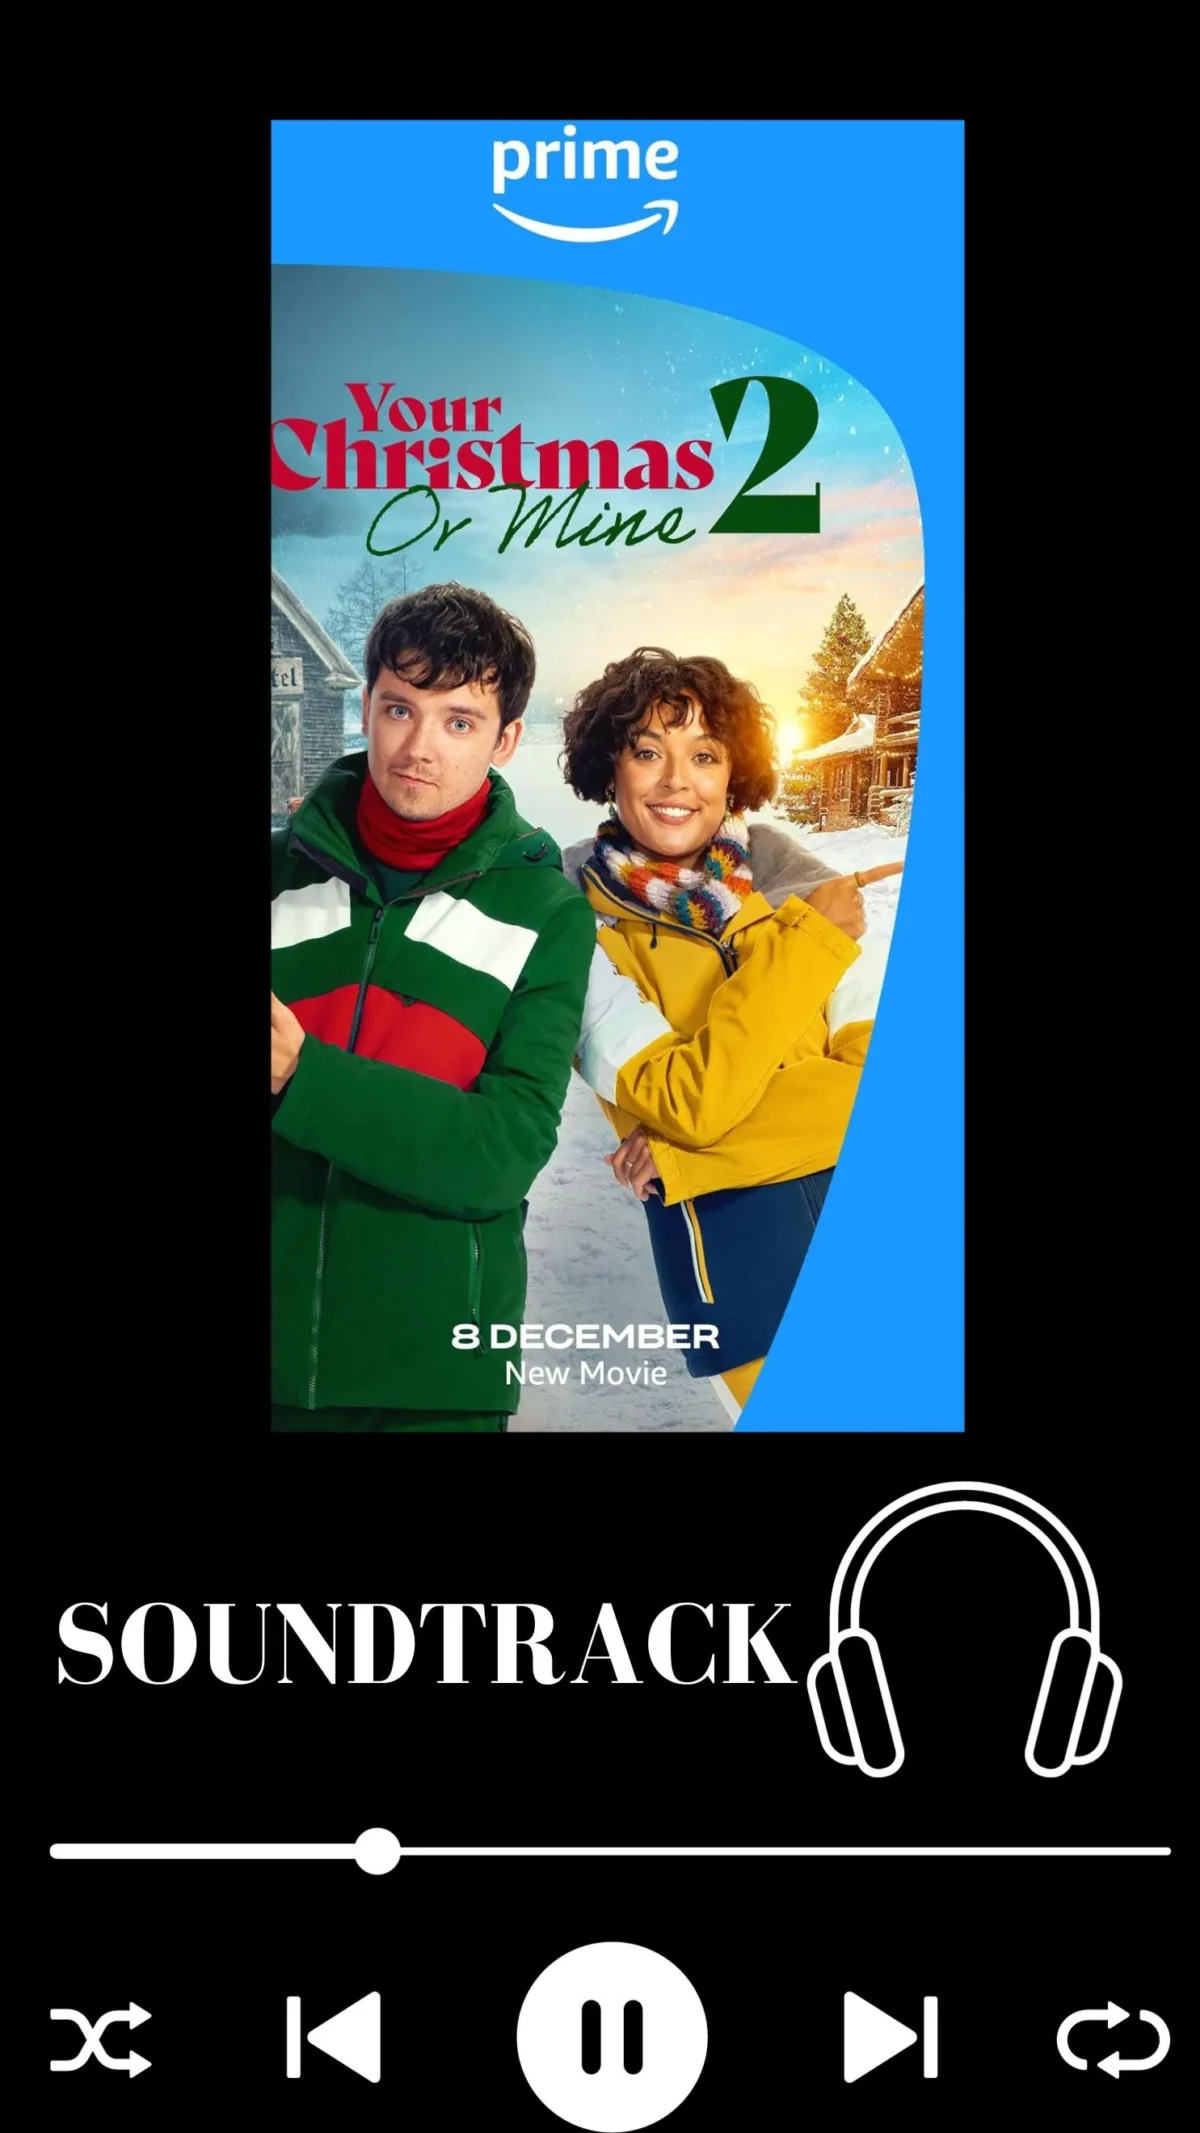 Your Christmas or Mine 2 Soundtrack